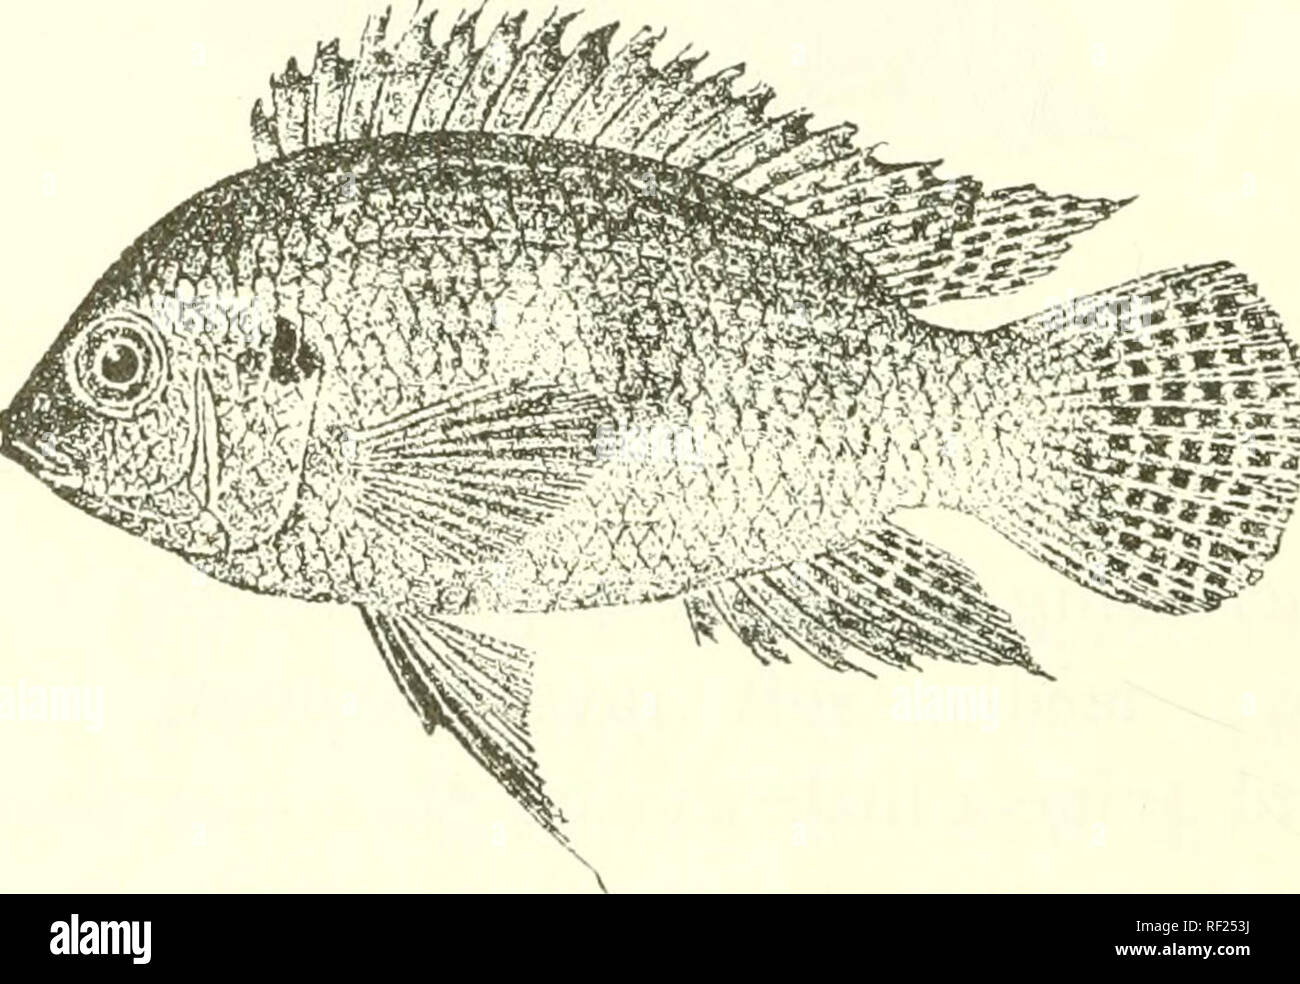 . Catalogue of the fresh-water fishes of Africa in the British Museum (Natural History). Fishes; Freshwater animals. 400 CICHLID.E. 21. rELMATOCHROMIS ANSOIJGIT. Bouleng. Proc. Zool. Soc. 1901, i. p. 8, pi. iv. fig. 1 ; Pellegr. MtMn. Soc. Zool. France, xvi. 1904, p. 282. Depth of body 2i to 2| times in total length, length of head 2j to 3 times. Head If to If times as long as brond; snout rounded, with straight or slightly convex upper profile, broader than long, as long as eye, which is 3^ to o§ times in length of head, 1^ times in inter- orbital width, and exceeds prfeorbital depth ; mouth  Stock Photo